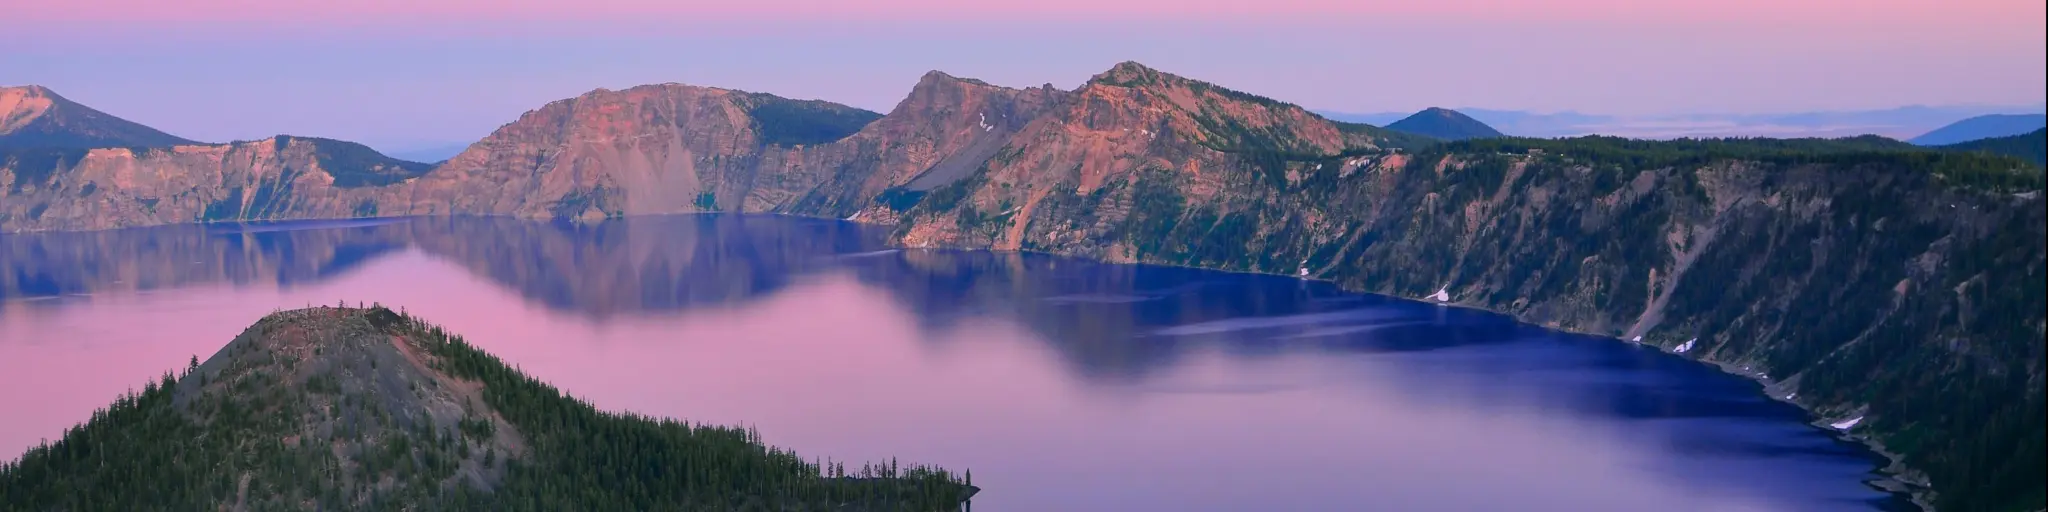 Oregon, USA with a beautiful view of Crater Lake at sunset with hills in the distance and a pink sky.